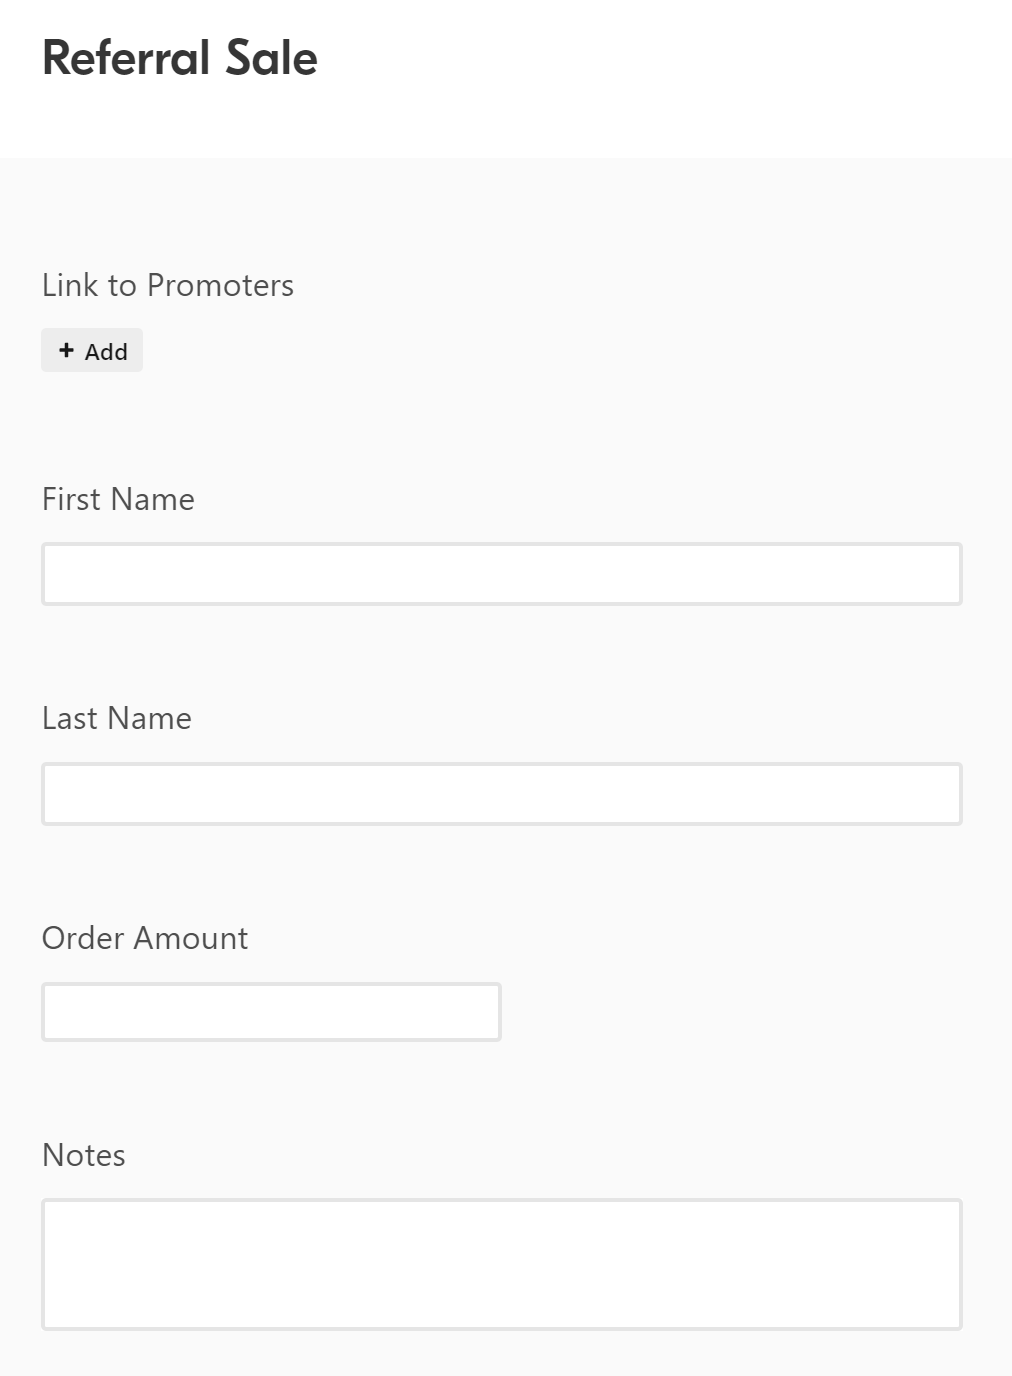 Referral Sale tracking on our referral tracking spreadsheet. a form you can enter in the referral information and link to promoter